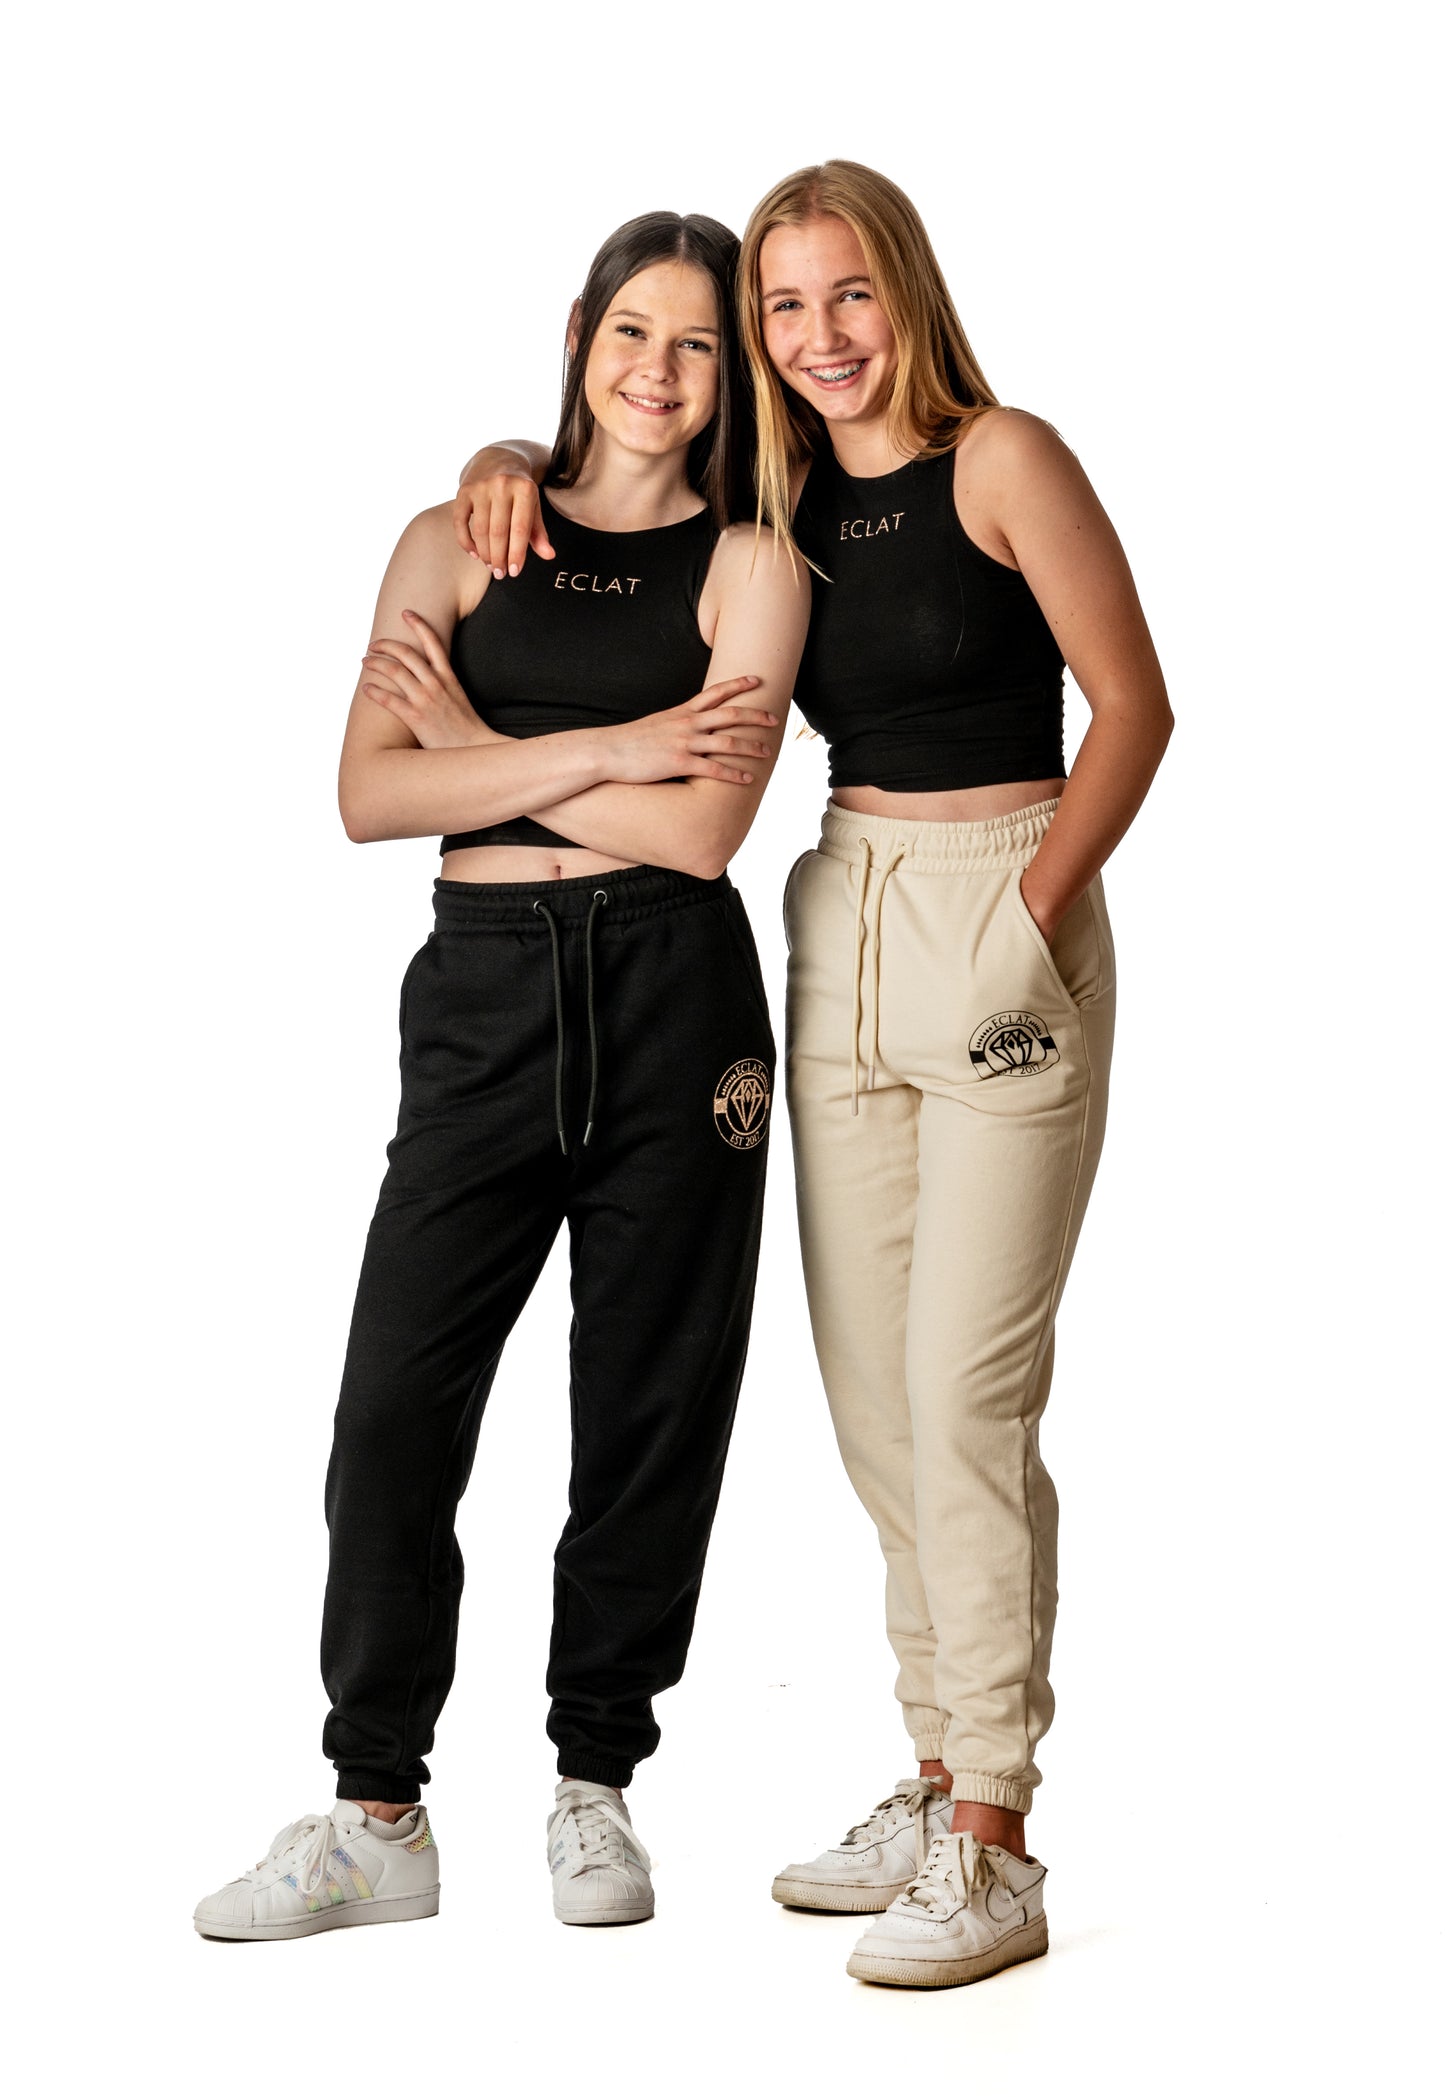 Young Rider Sustainable Joggers (Black)